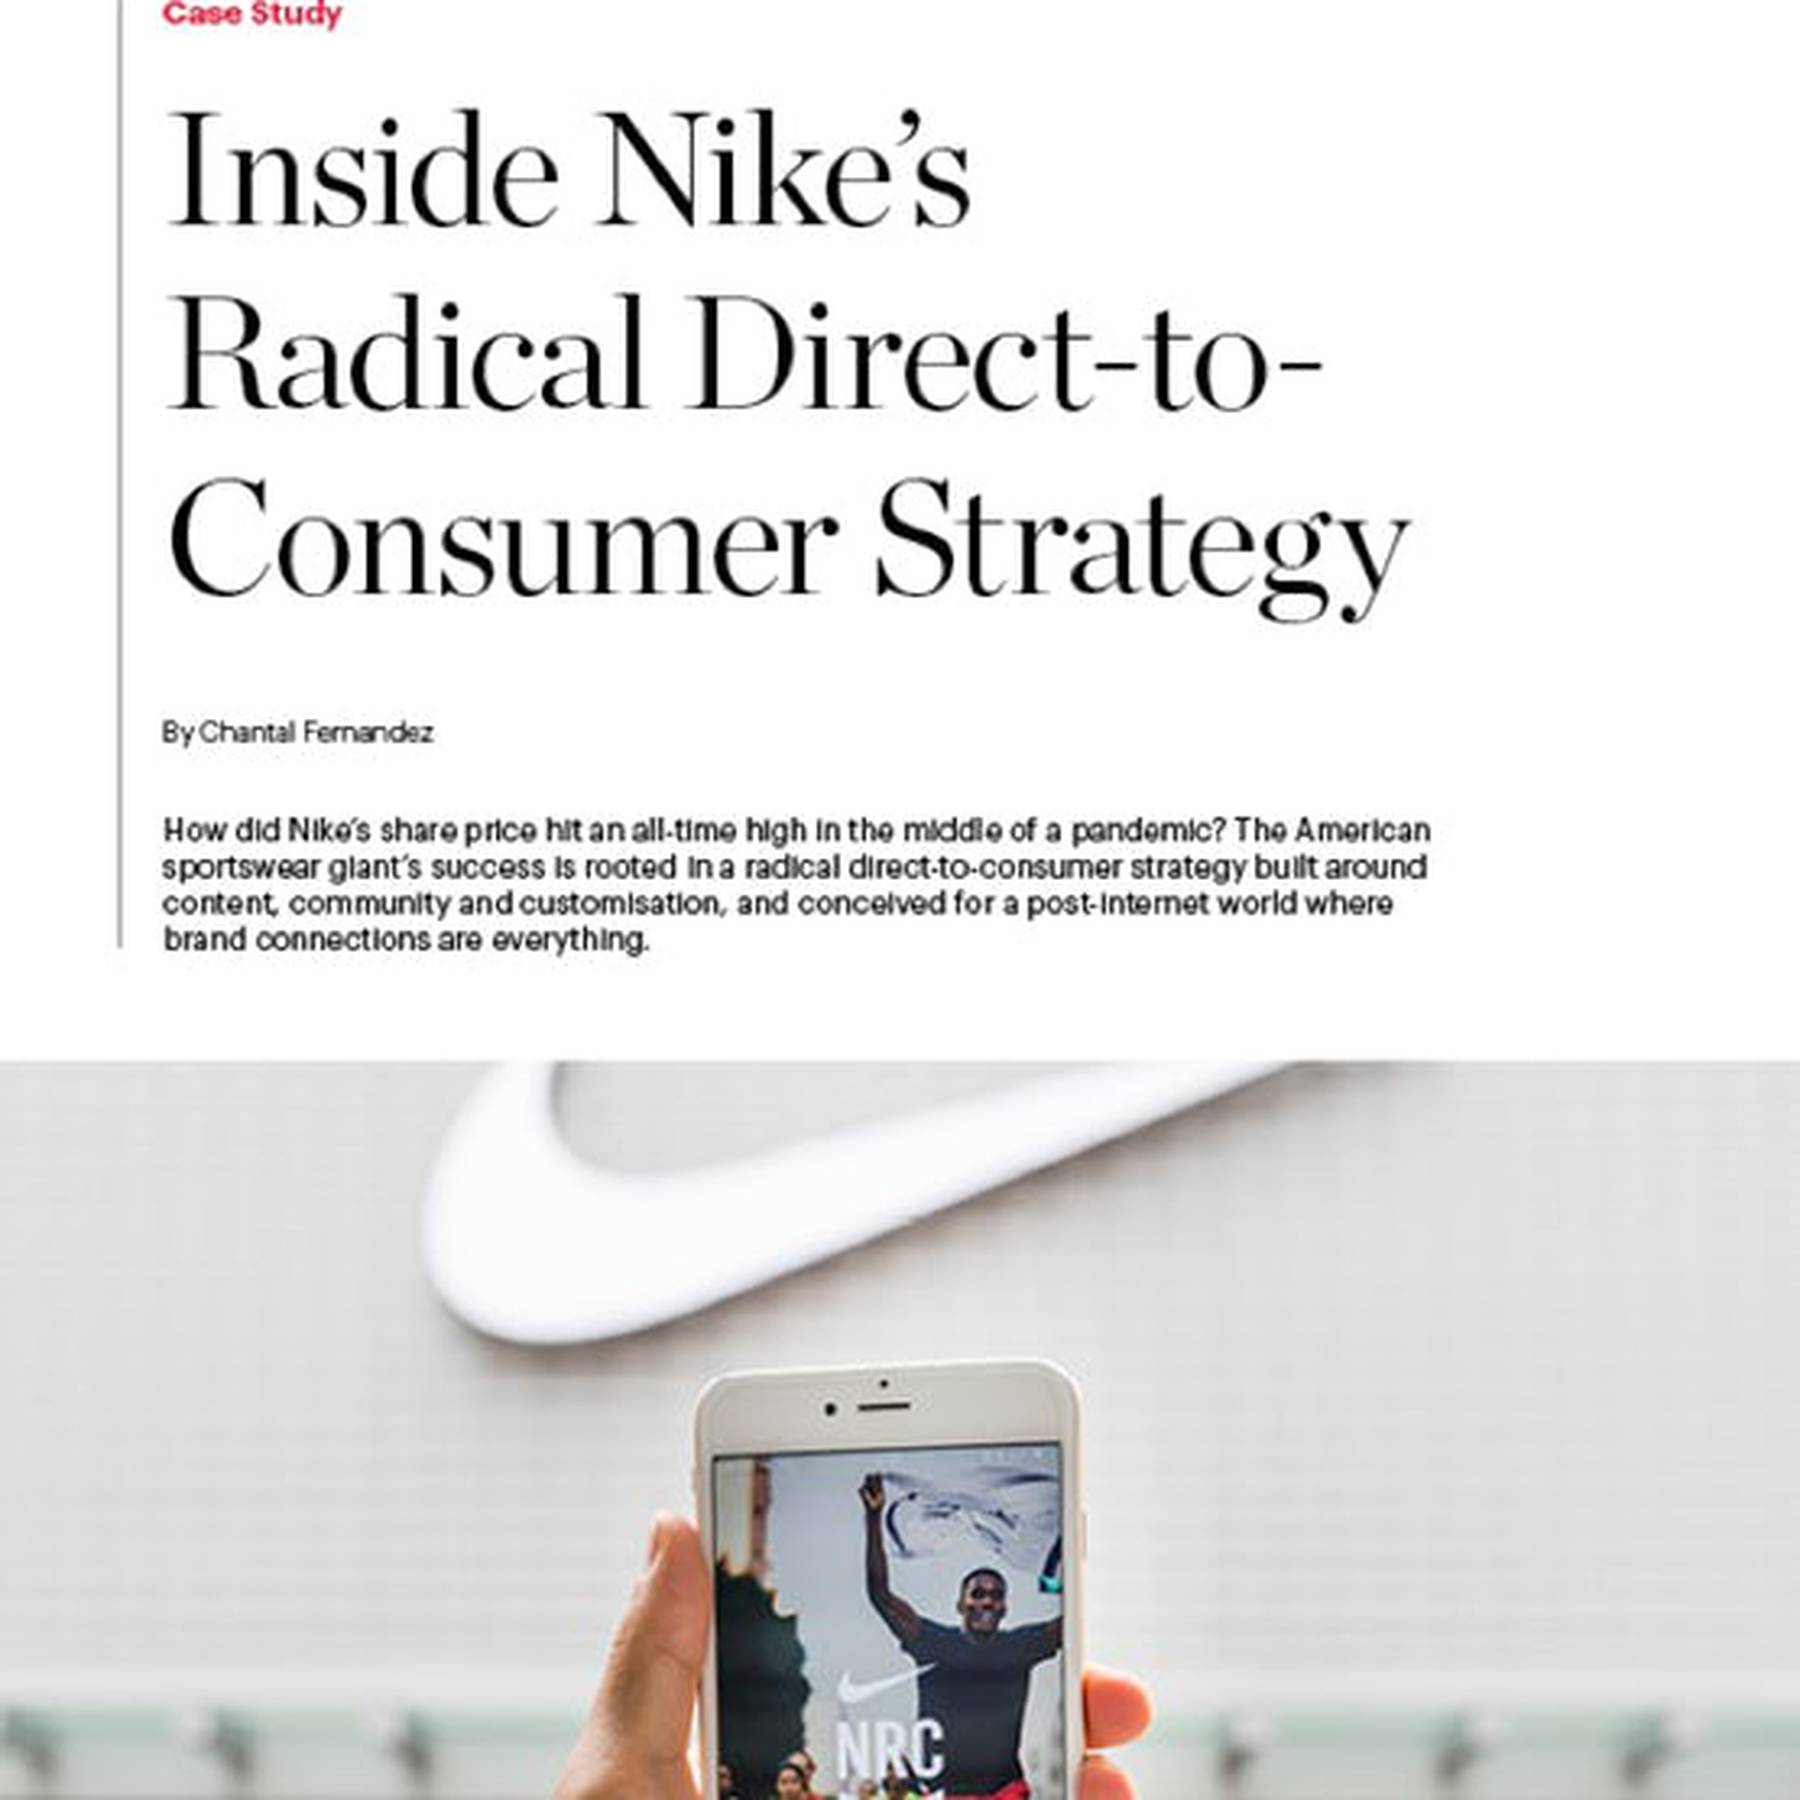 Nike's Radical Direct-to-Consumer Strategy Download Case Study | BoF